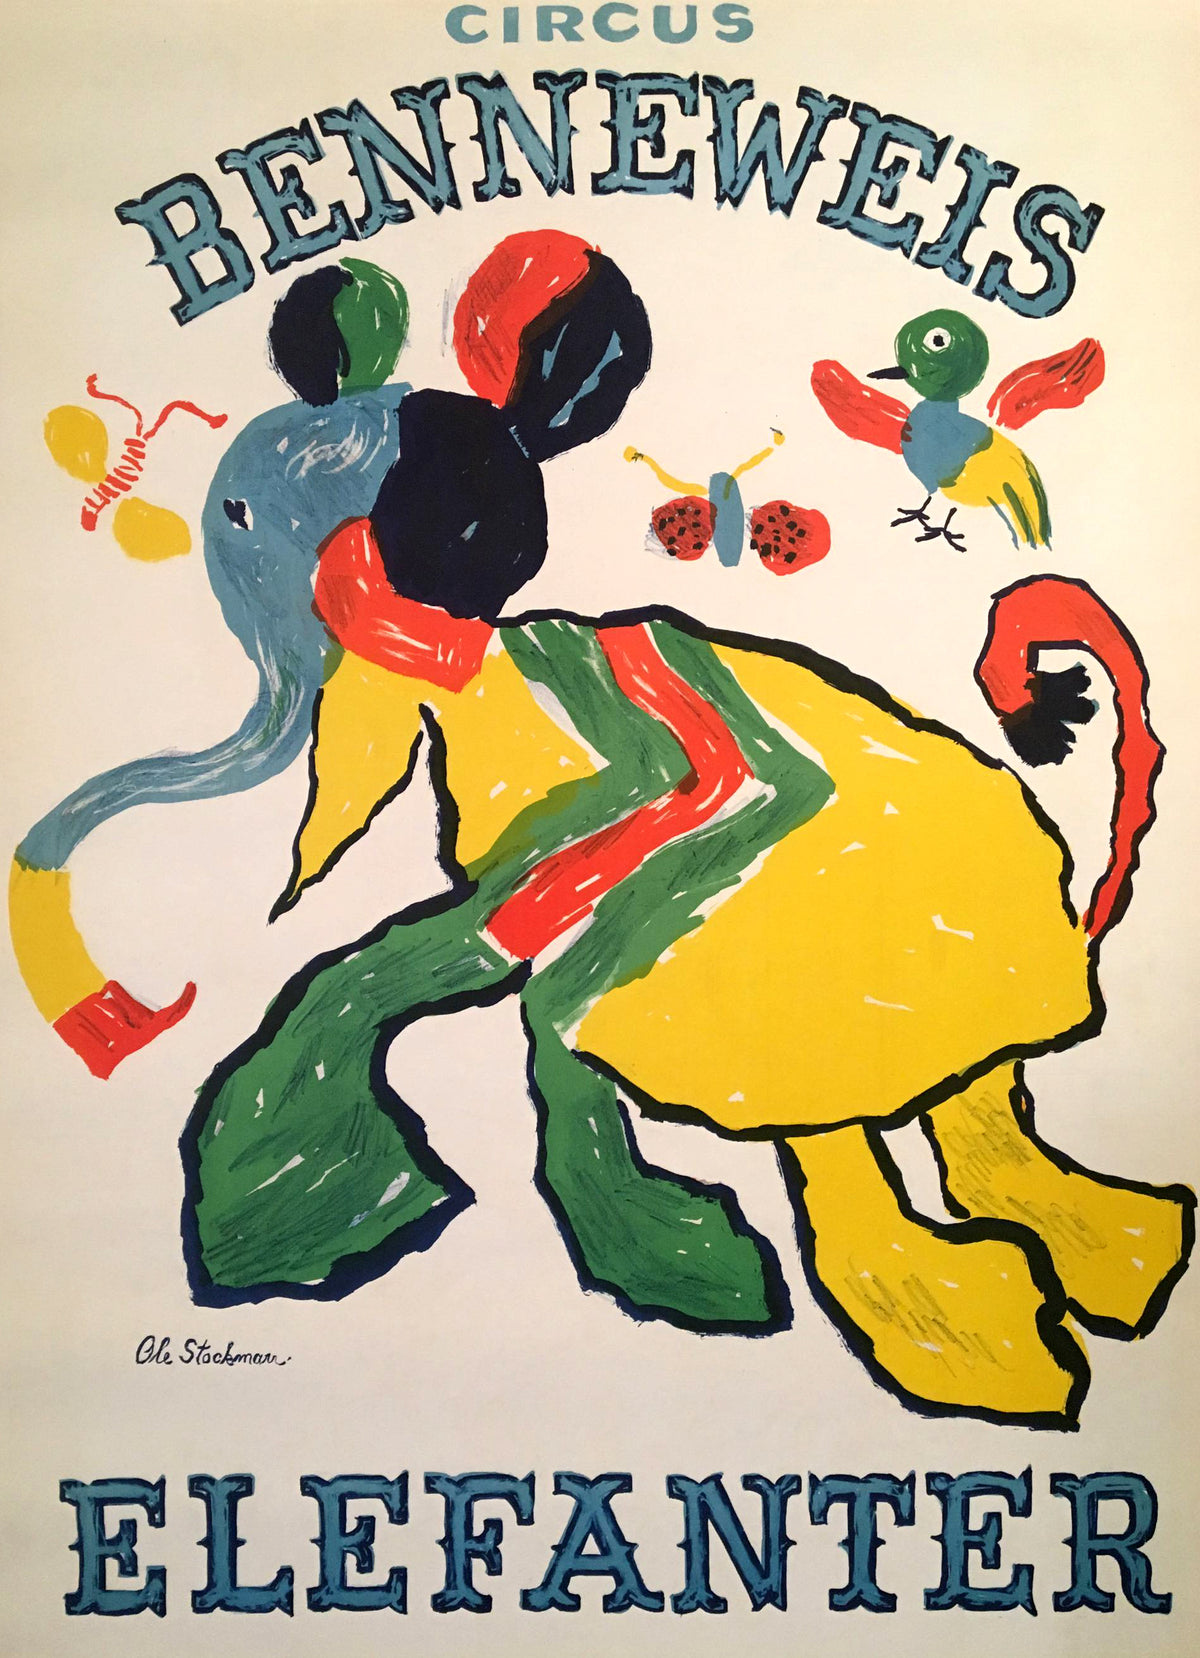 Circus Benneweis- Elefanter - Authentic Vintage Poster